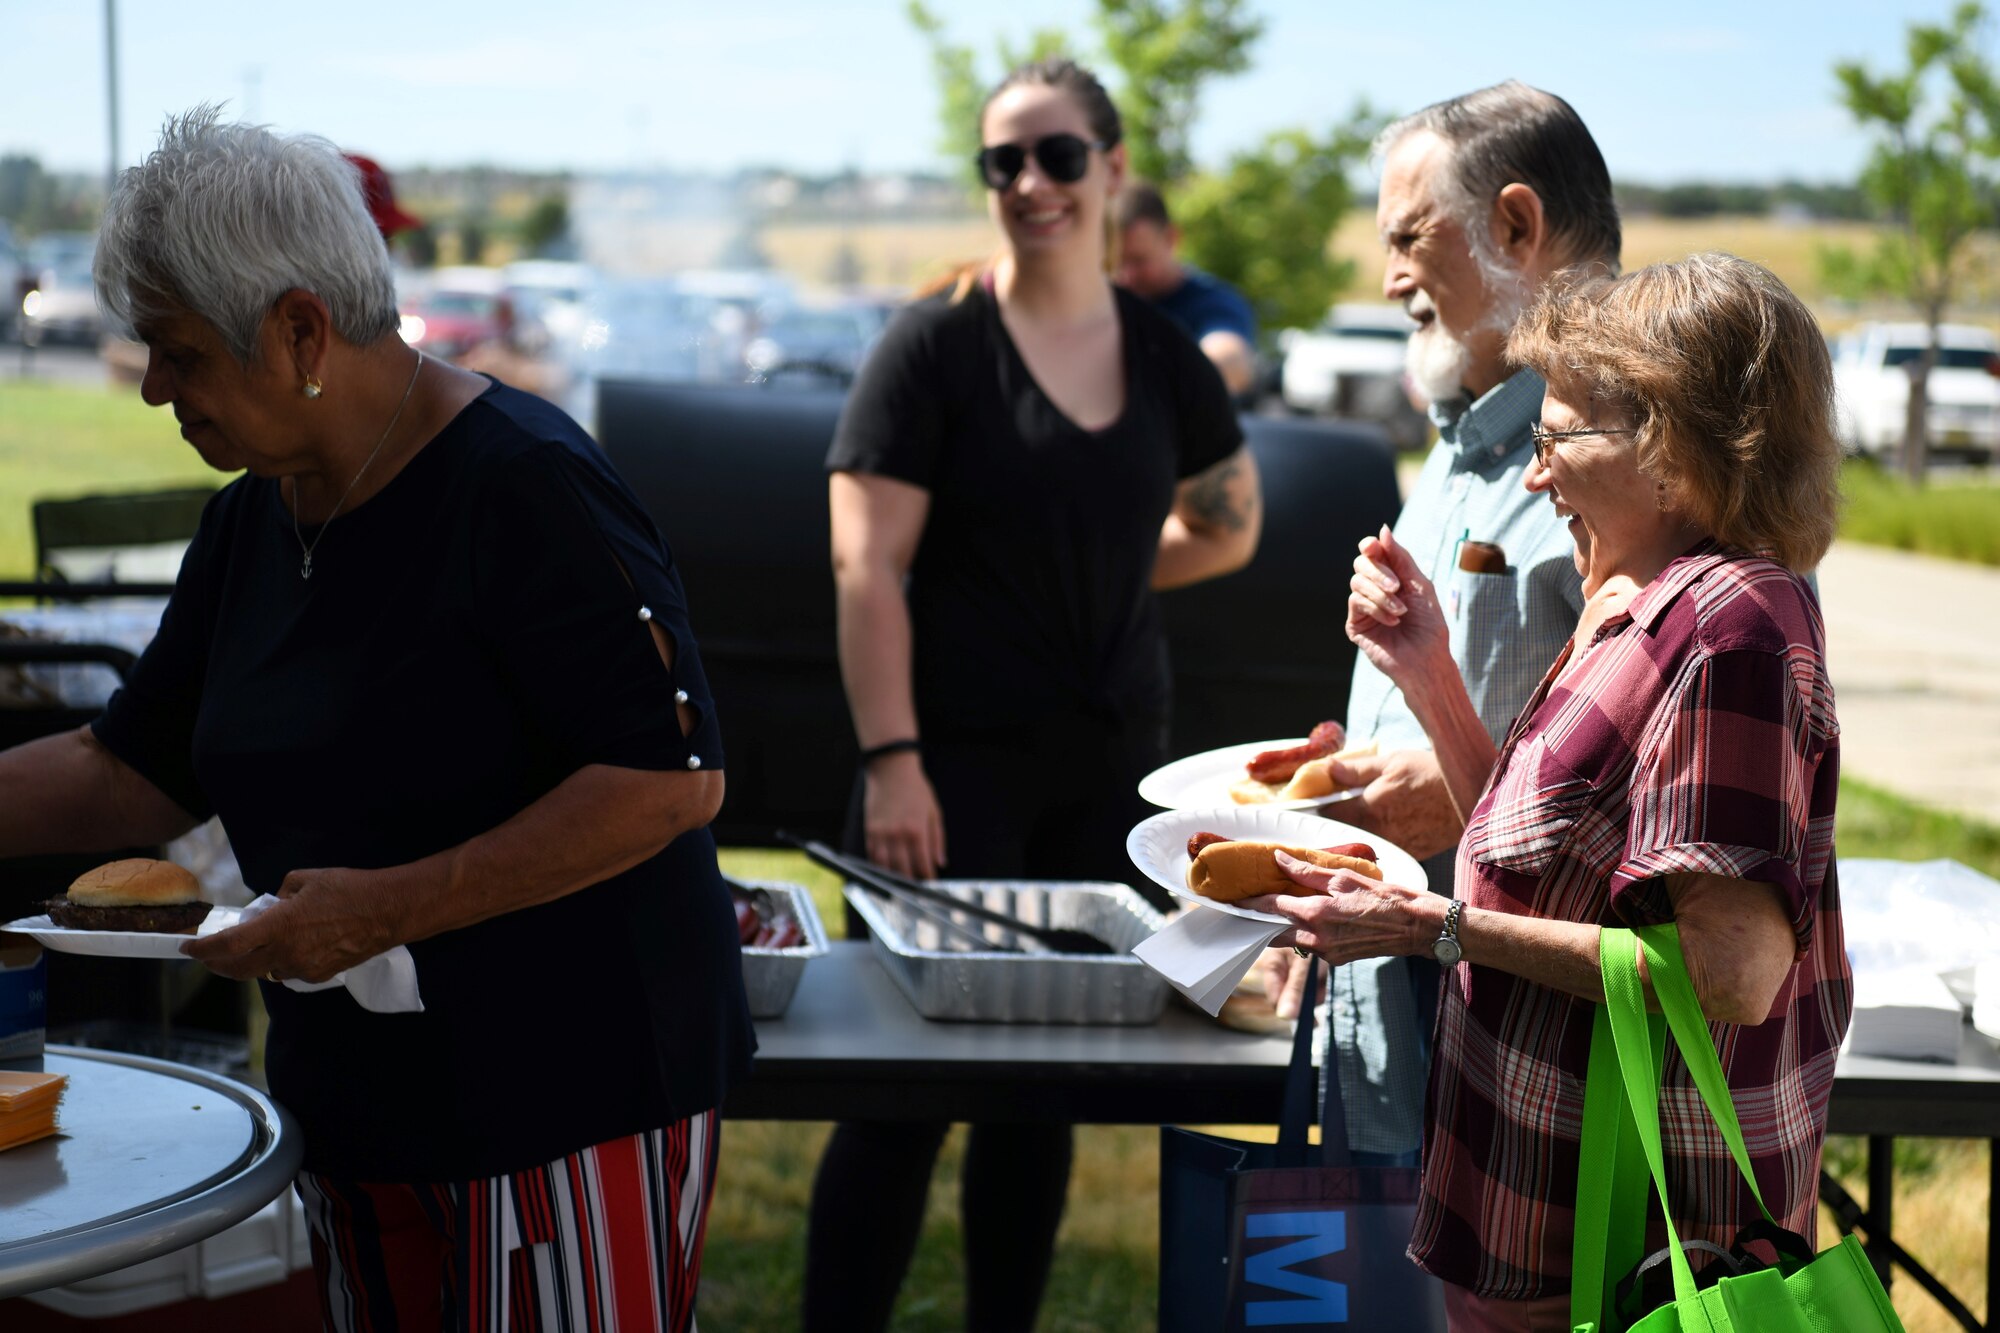 Attendees at the Retiree Appreciation Day stand in line for food, July 27, 2019, on Buckley Air Force Base, Colo. The Retiree Affairs Office hosted Retiree Appreciation Day, giving attendees free food and educating retirees on the free resources available for all their needs and benefits. (U.S. Air Force photo by Airman 1st Class Michael D. Mathews)